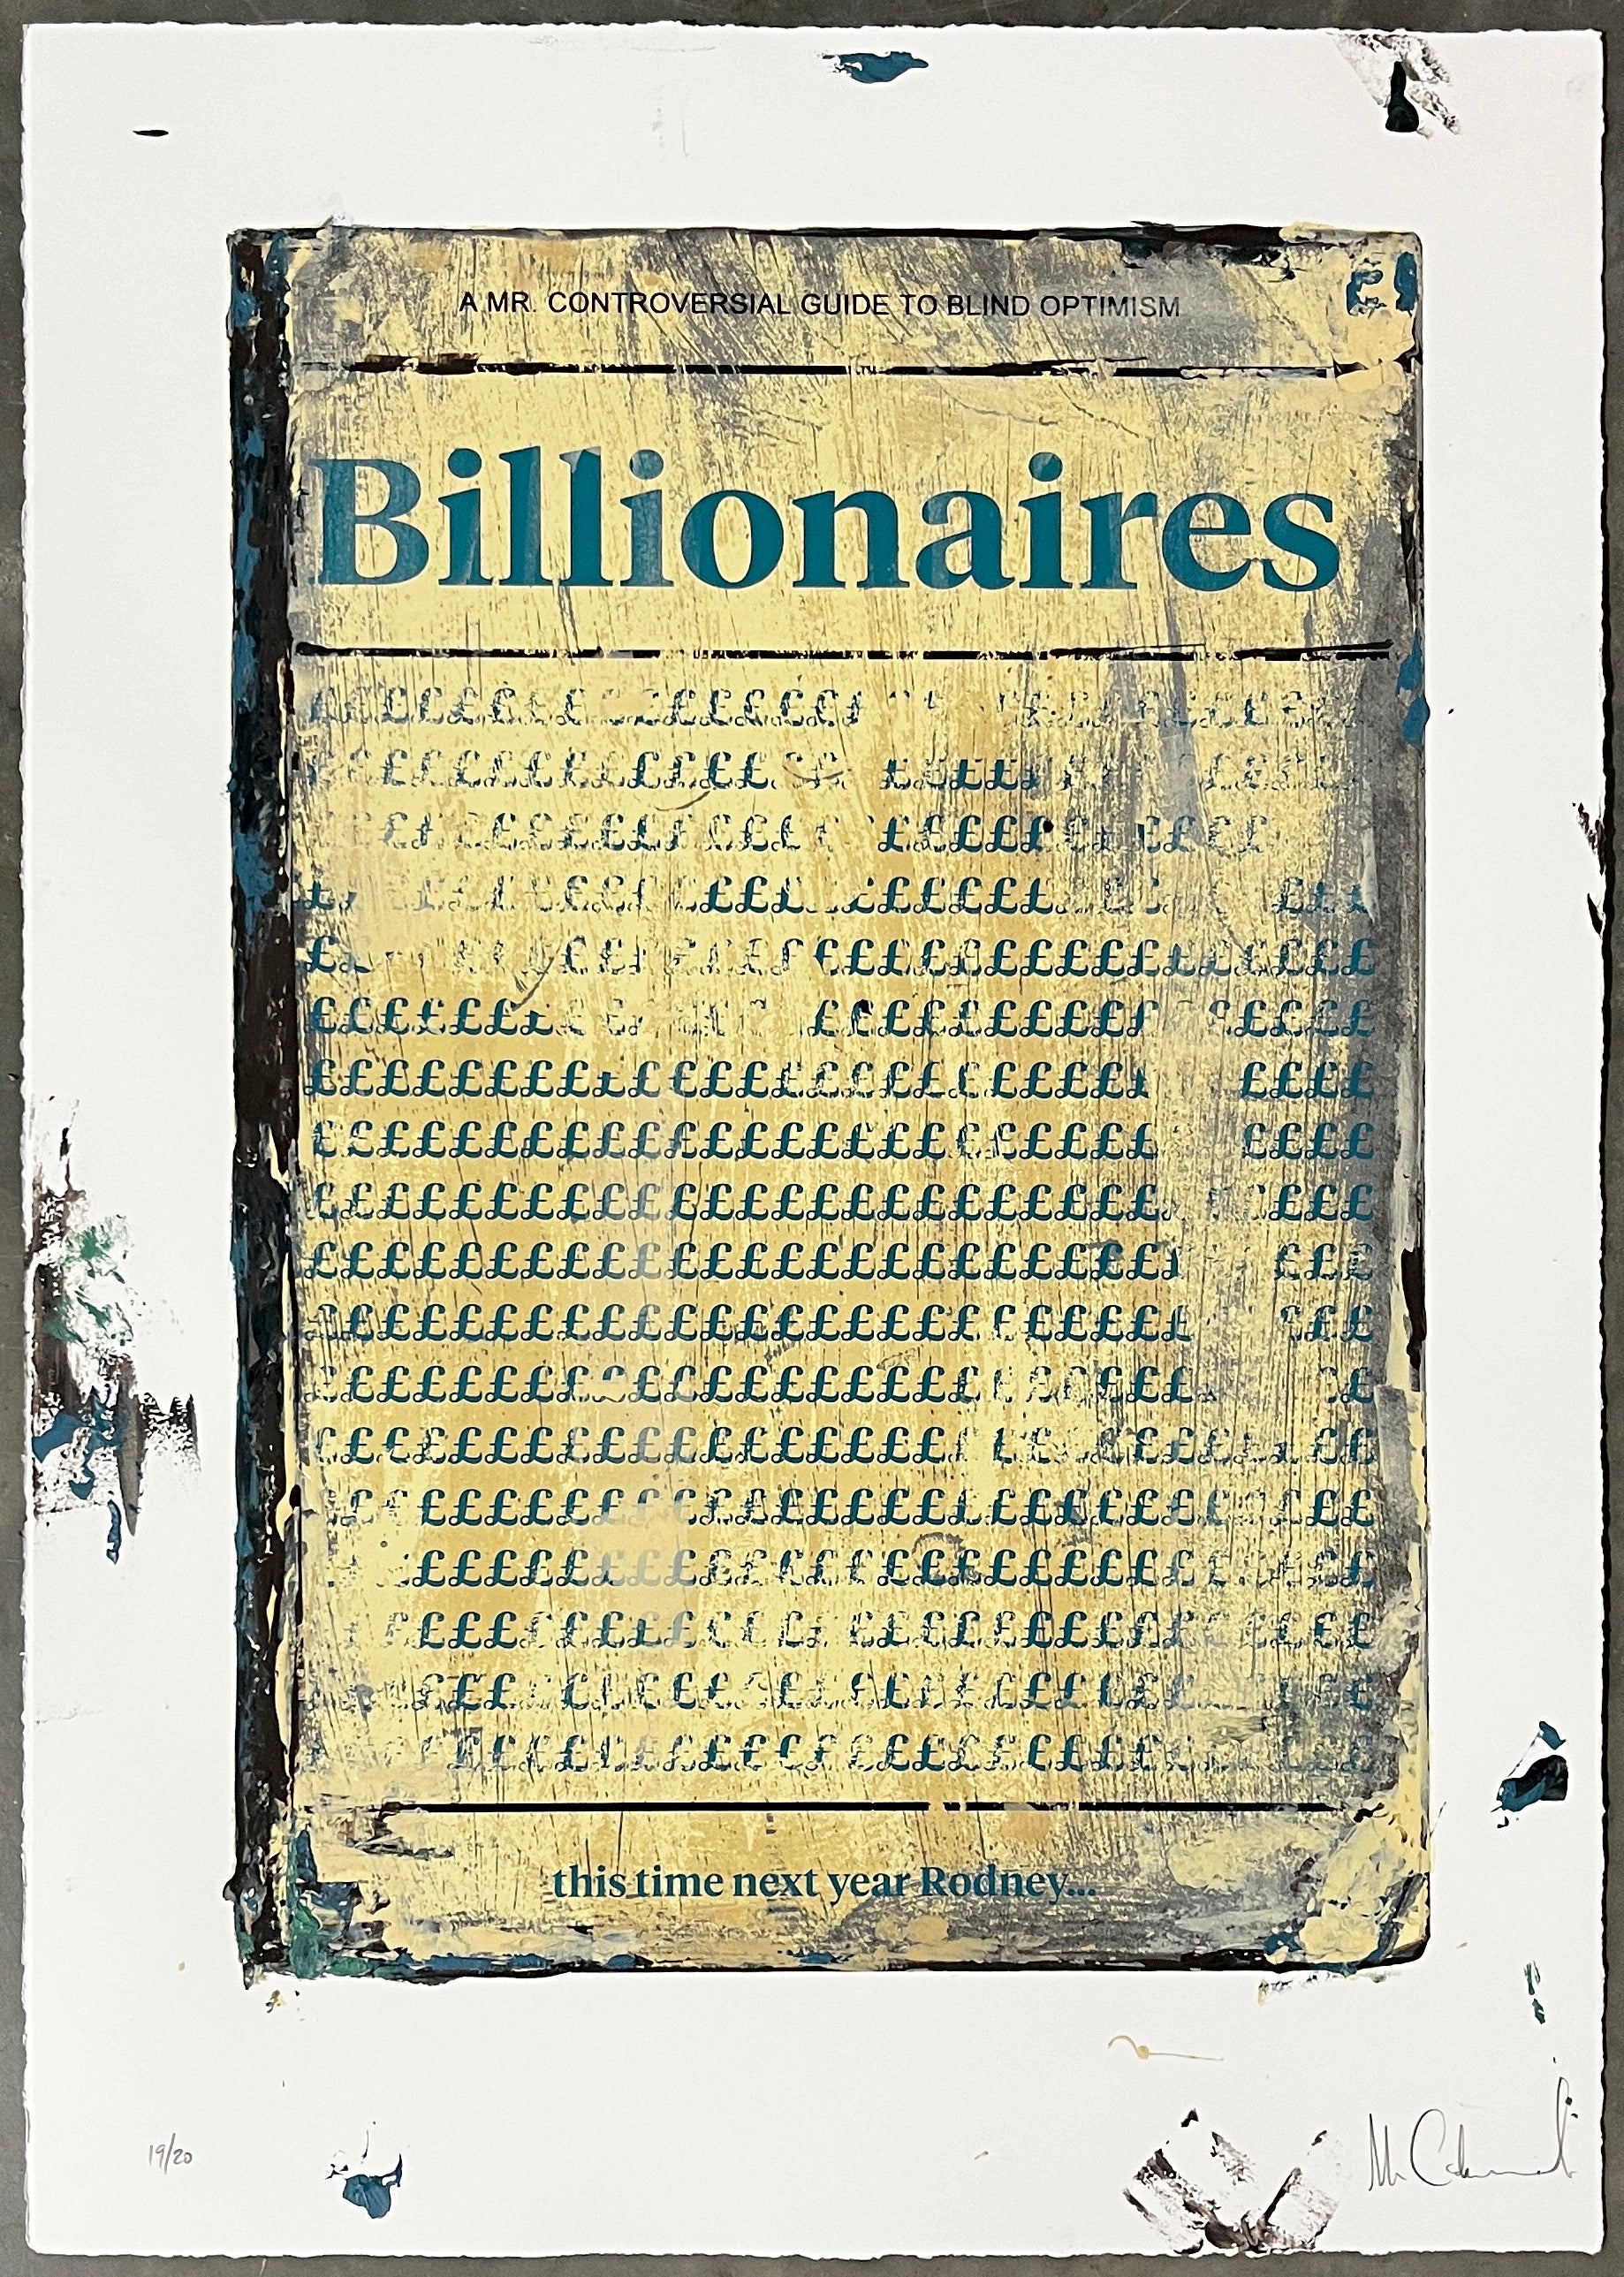 Mr Controversial, Artist, Billionaires, Limited edition hand-finished print, Edition 19, TAP Galleries, Essex Chelmsford Art Gallery 